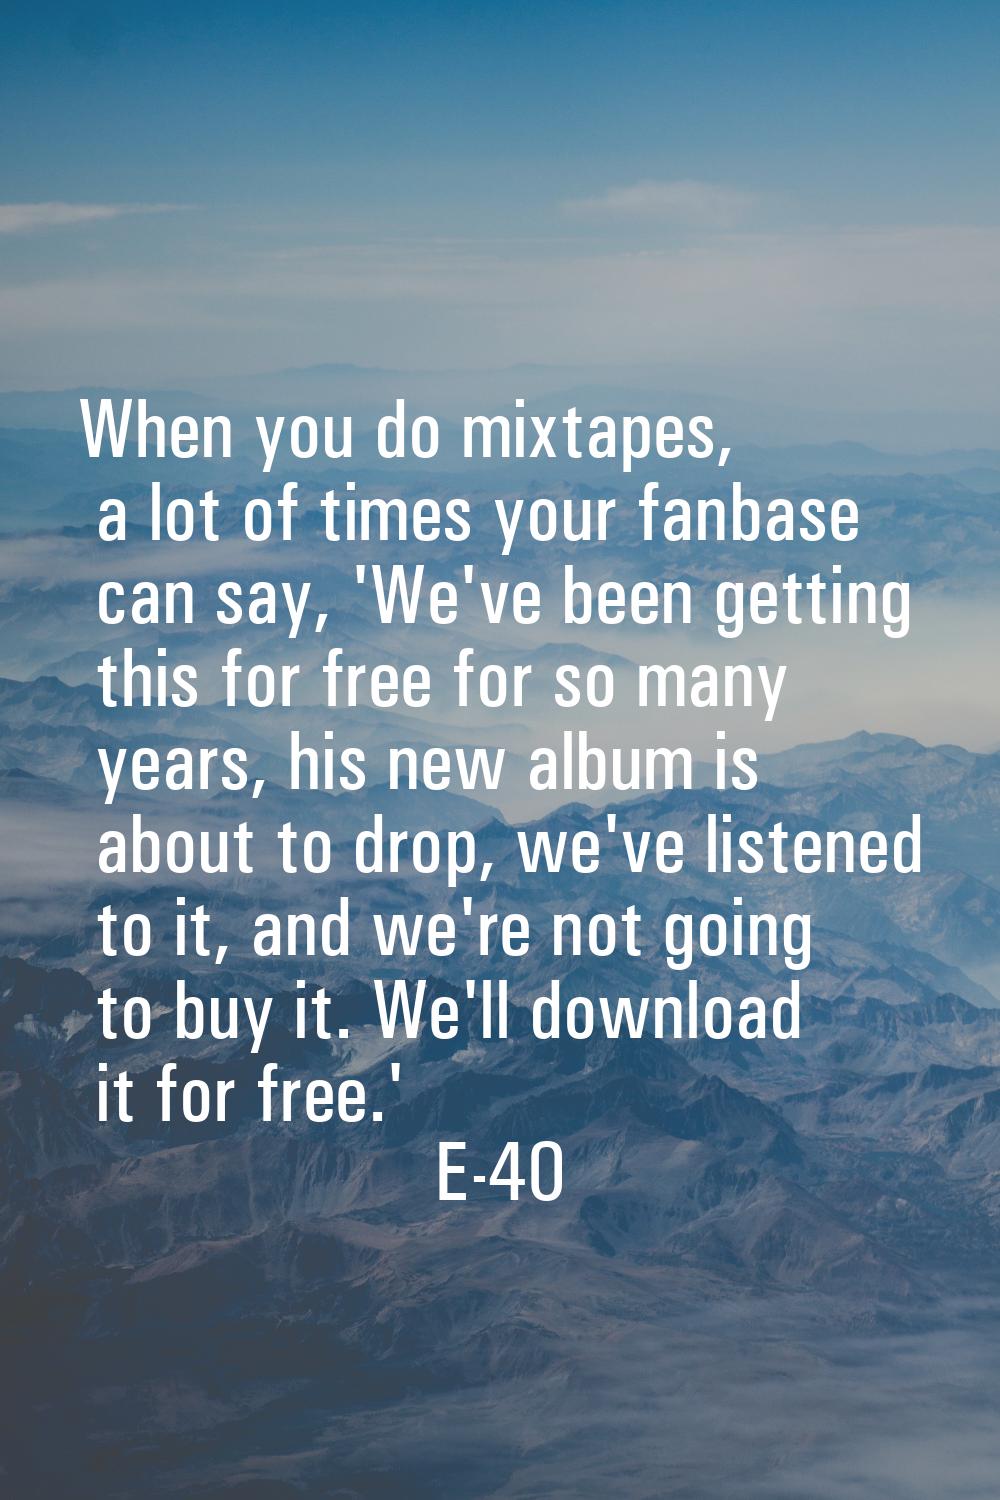 When you do mixtapes, a lot of times your fanbase can say, 'We've been getting this for free for so